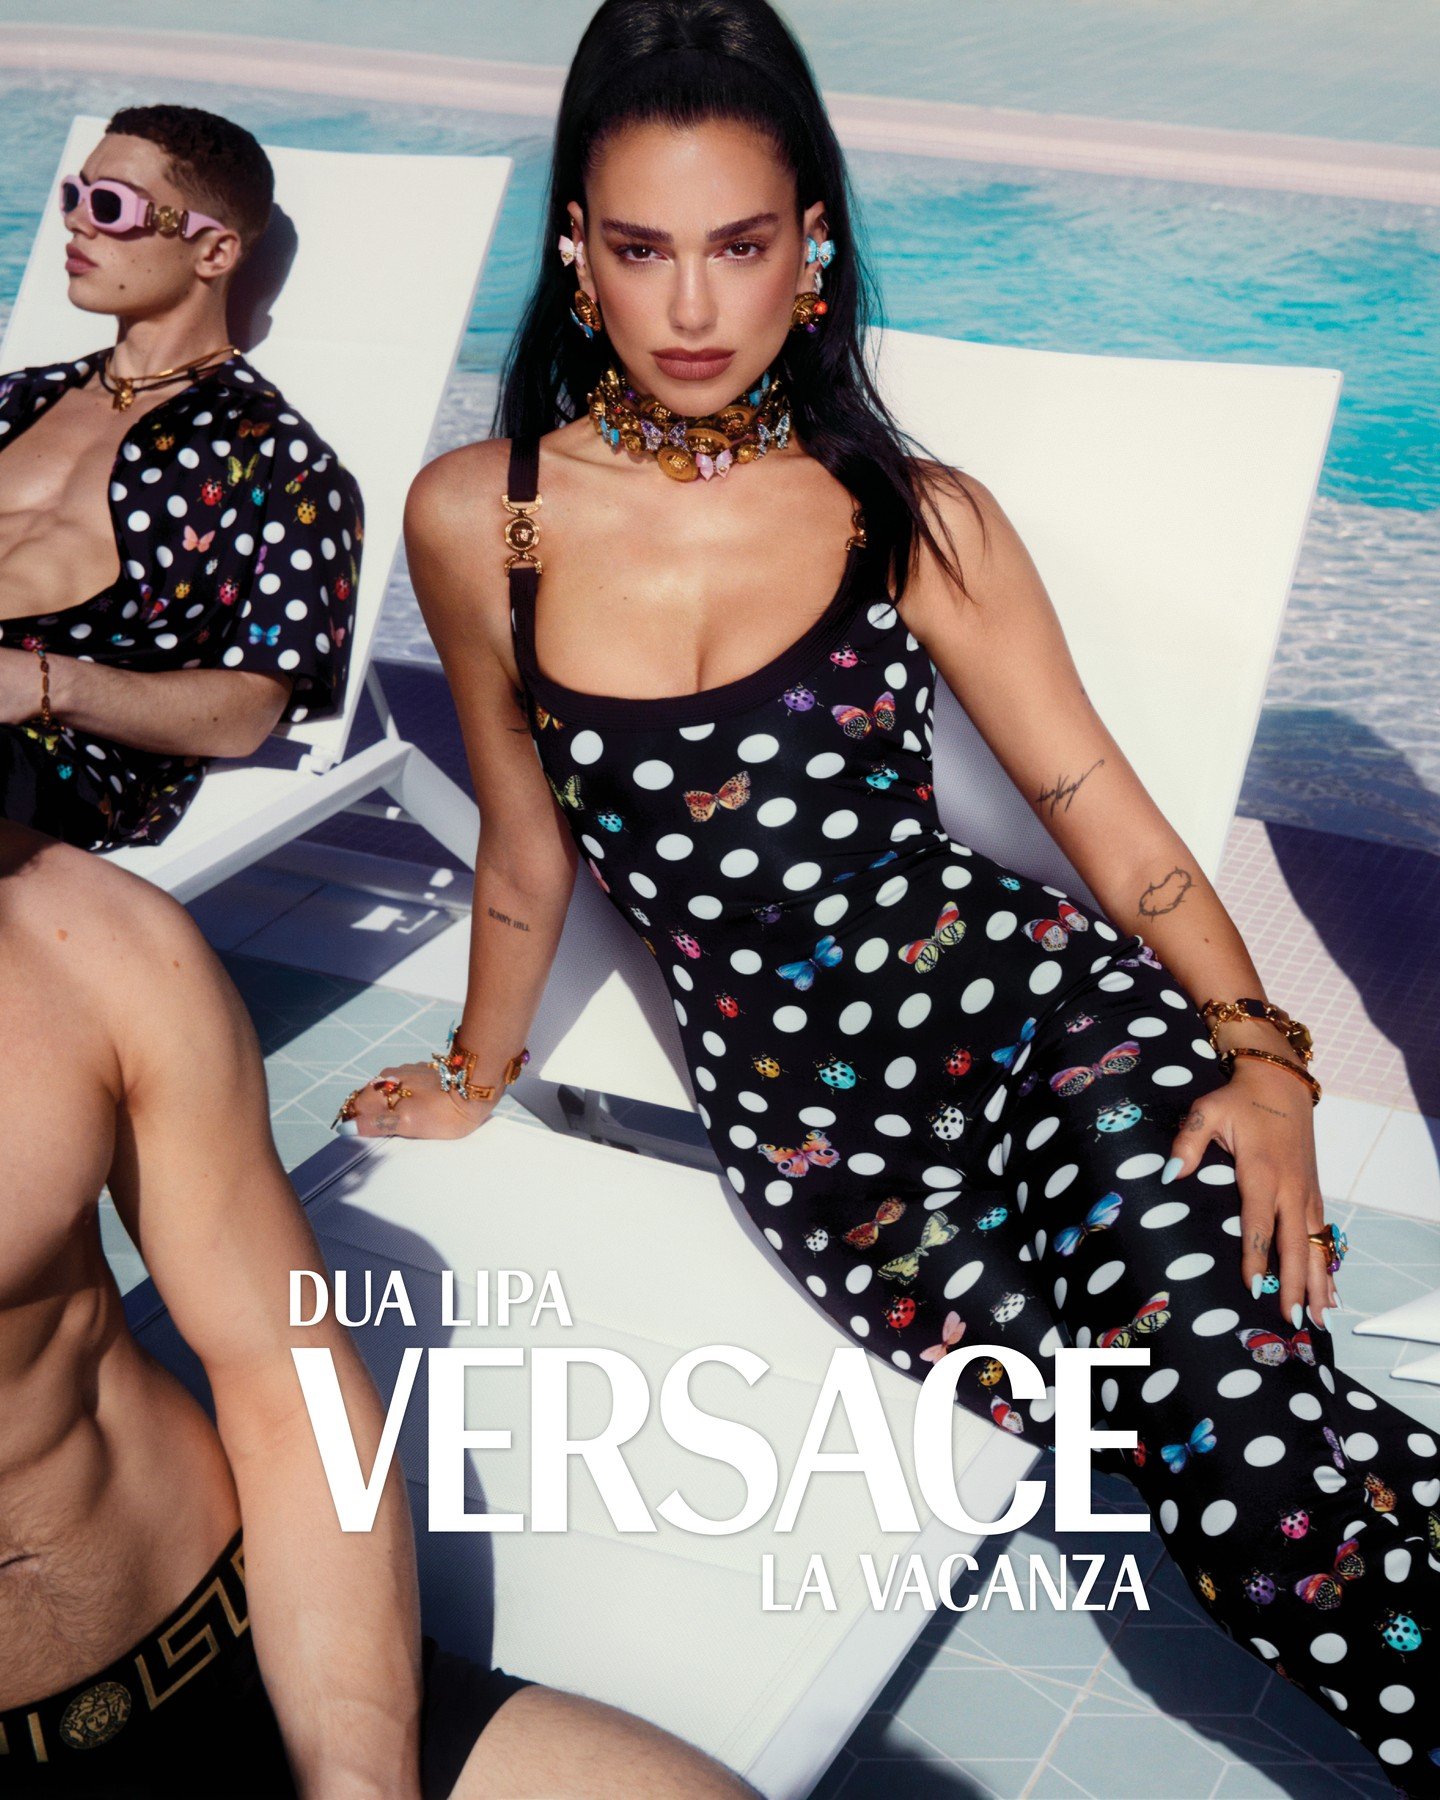 VERSACE HOLIDAY CAMPAIGN 2022